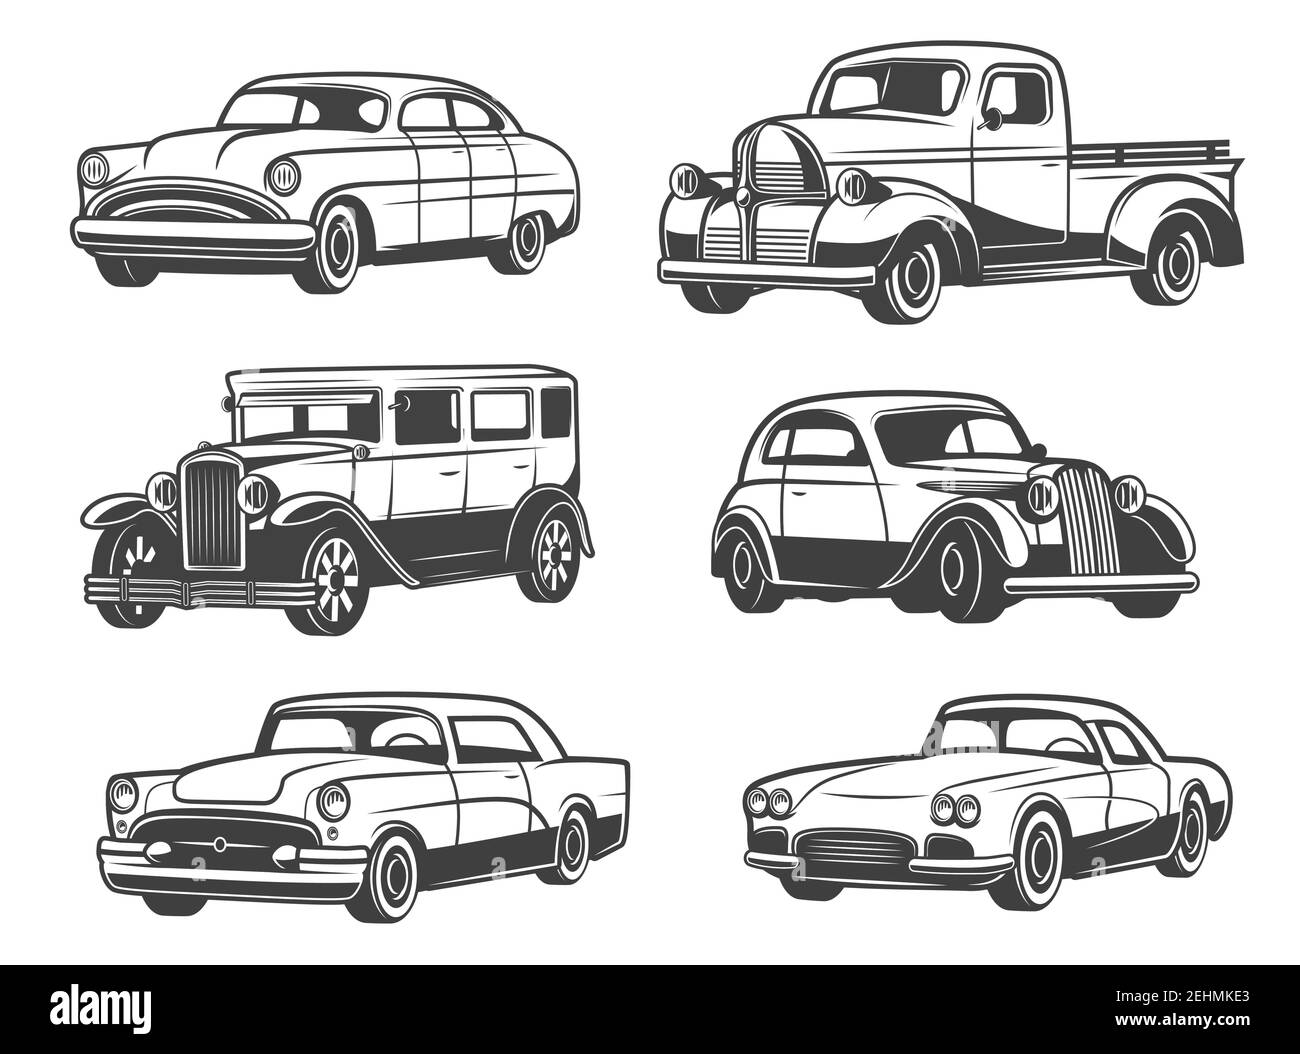 Retro cars and vintage antique vehicle models. Vector isolated icons of transport taxi cab, sport car and minivan, old luxury sedan or limousine. Car Stock Vector